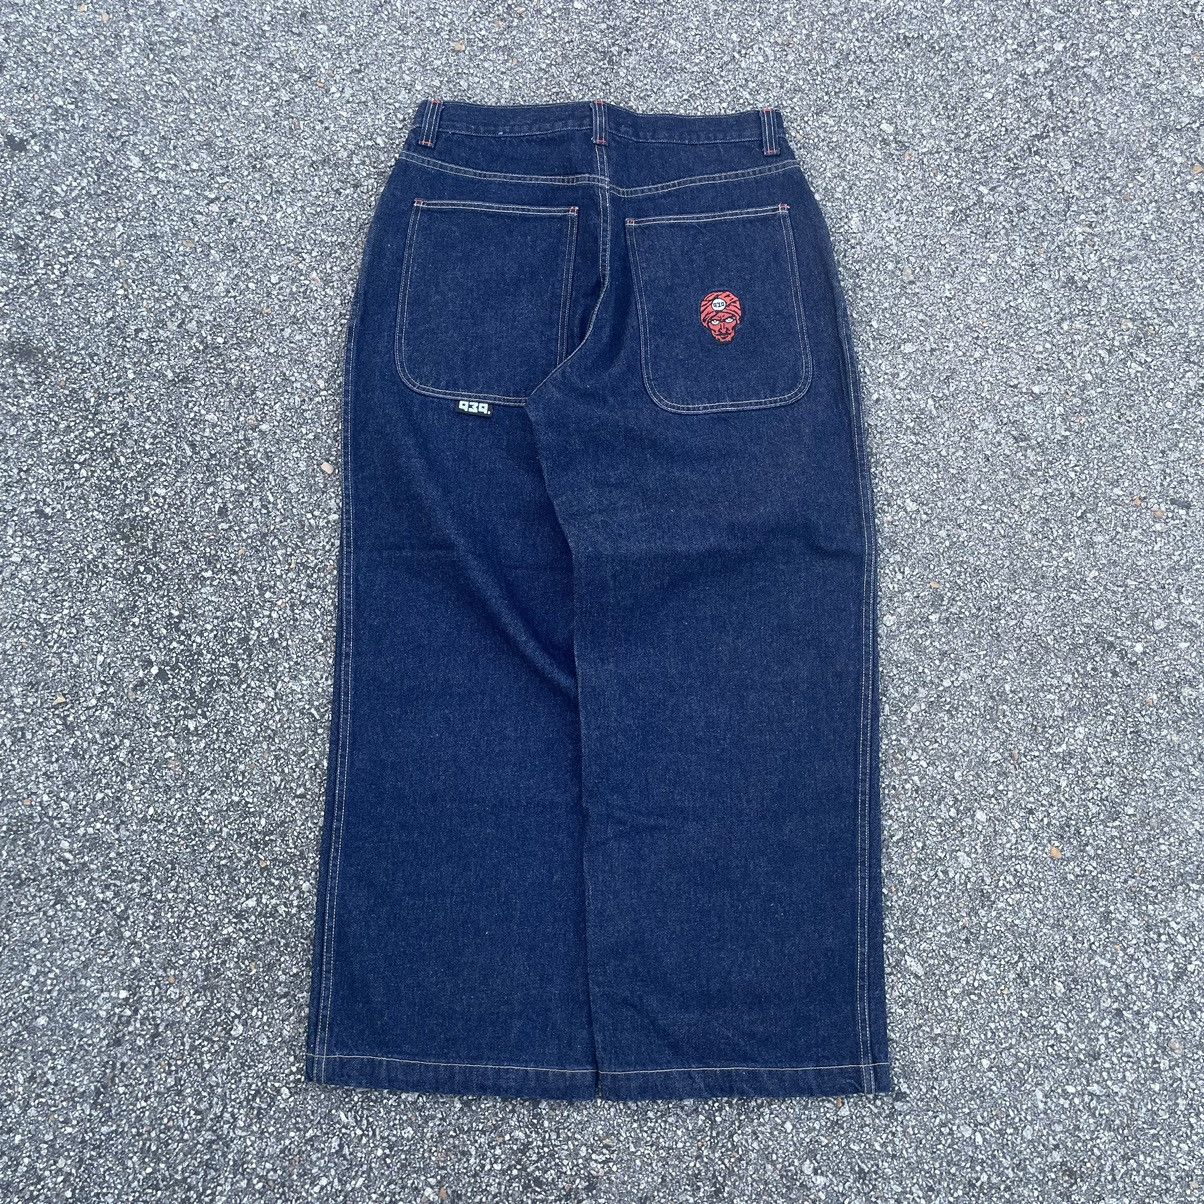 939 Jeans | Grailed